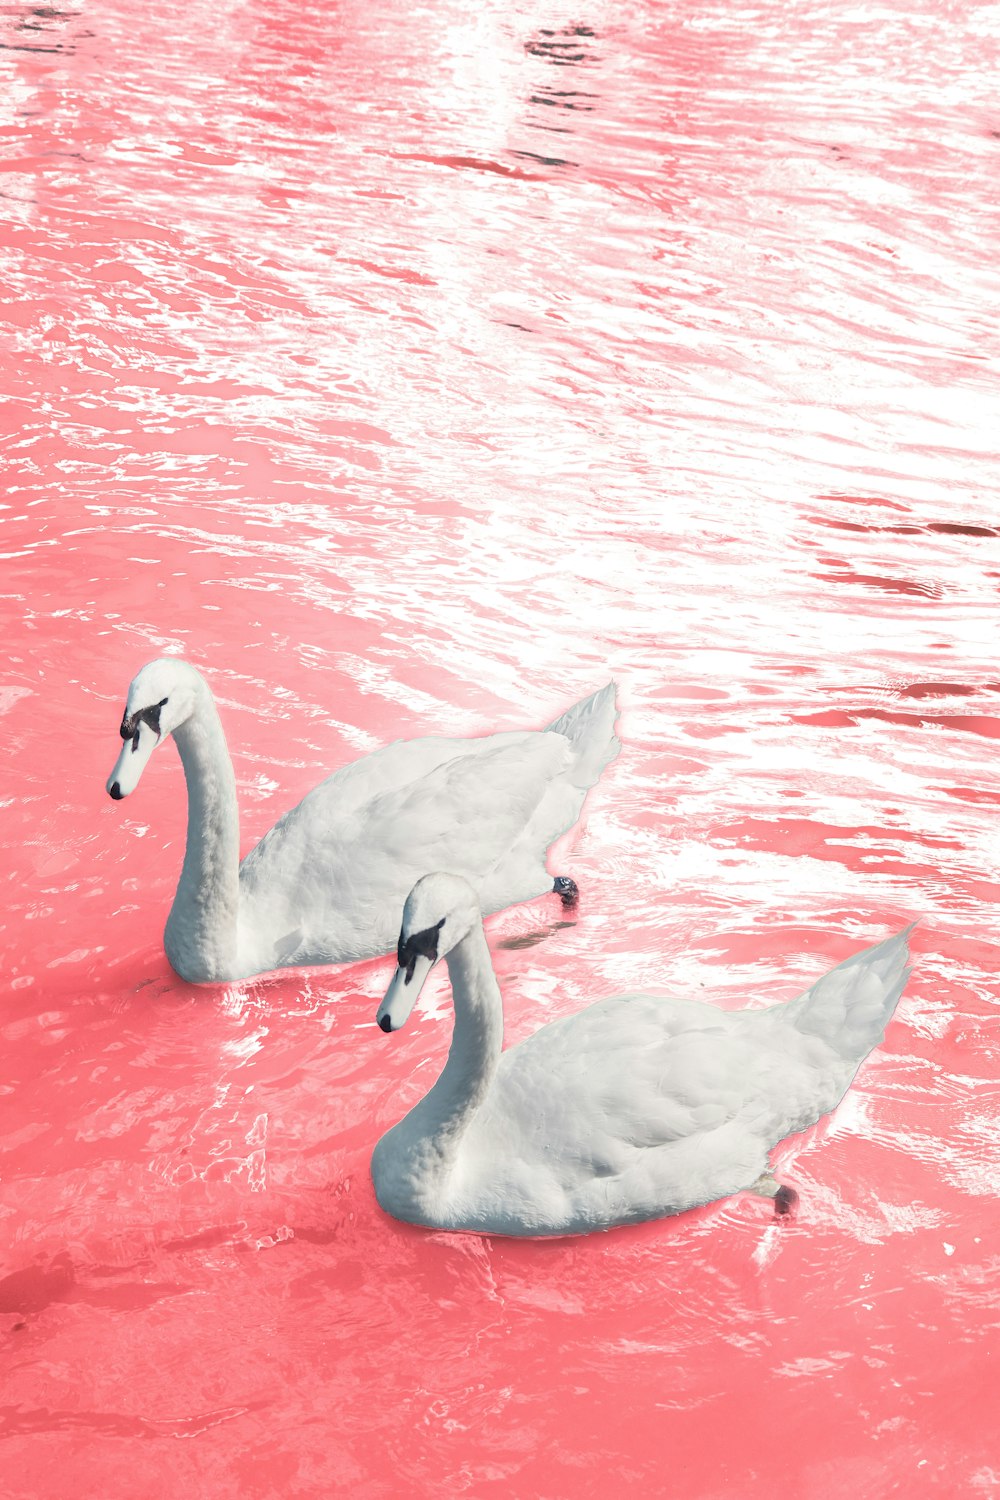 two white swans swimming in a pink lake